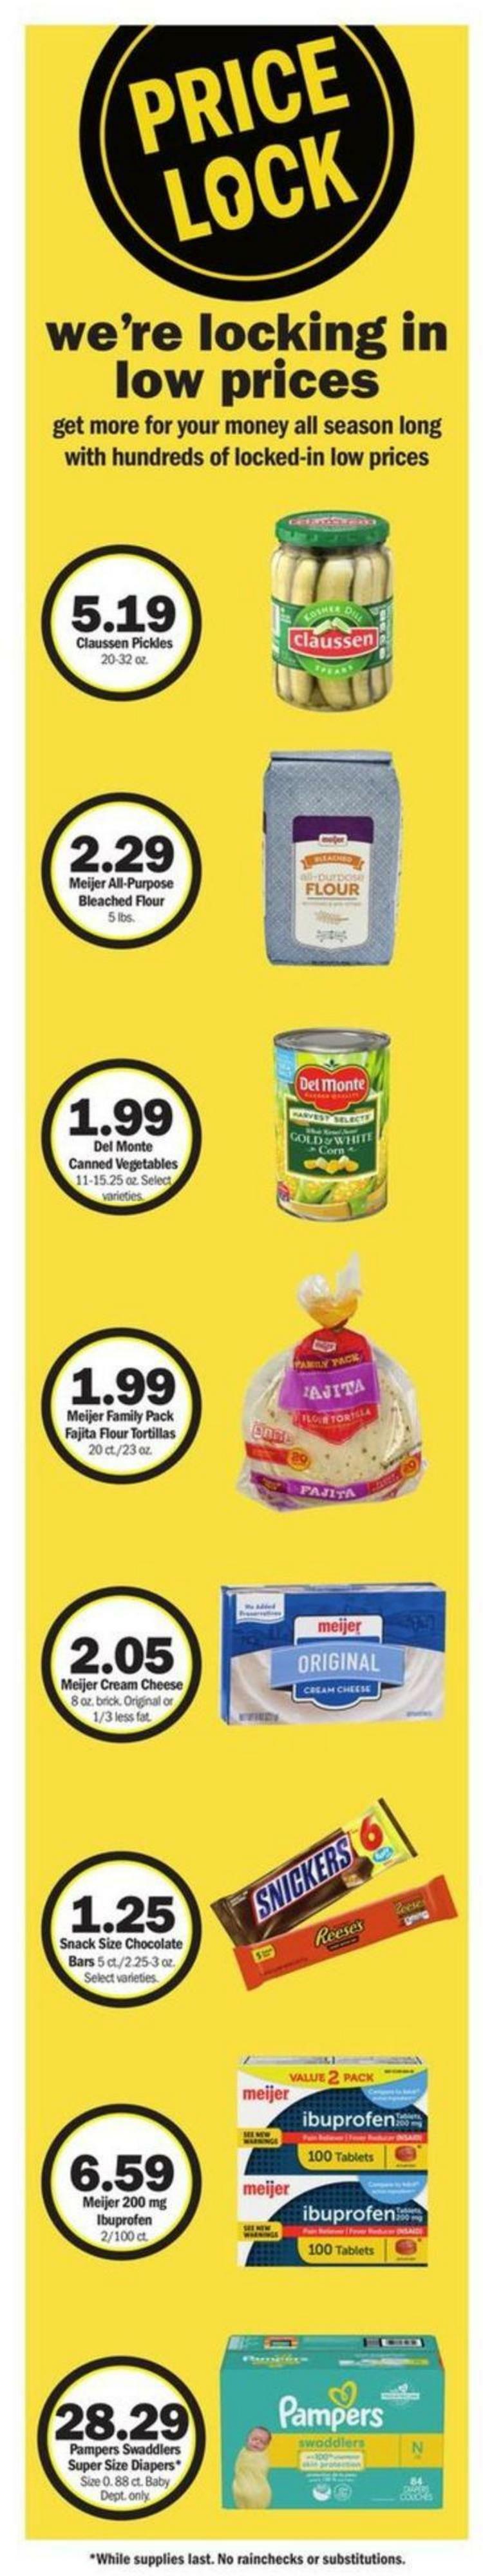 Meijer Weekly Ad from February 19